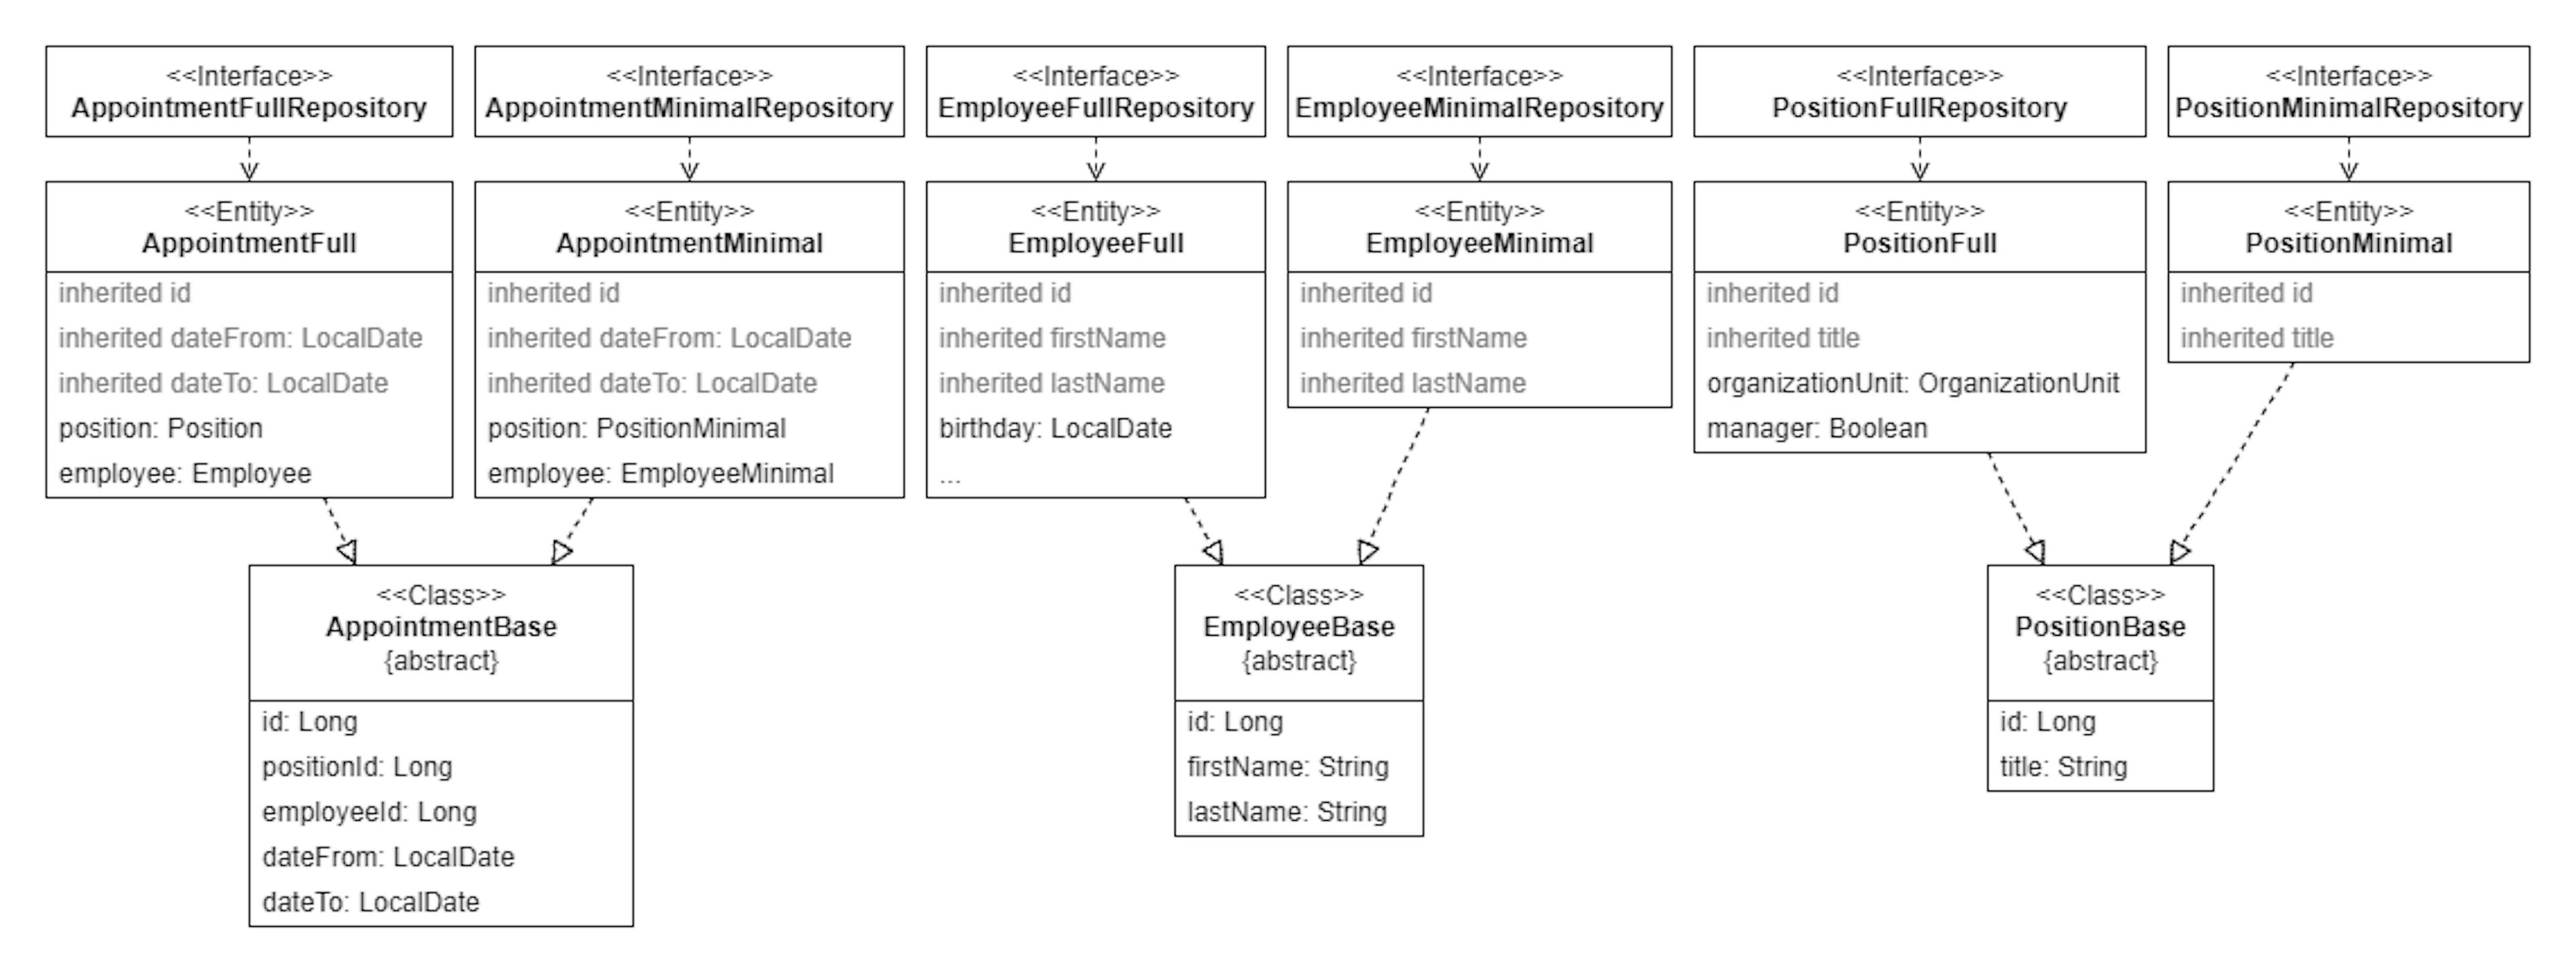 Figure 5. Entity model of appointment with additional MinimalView entities